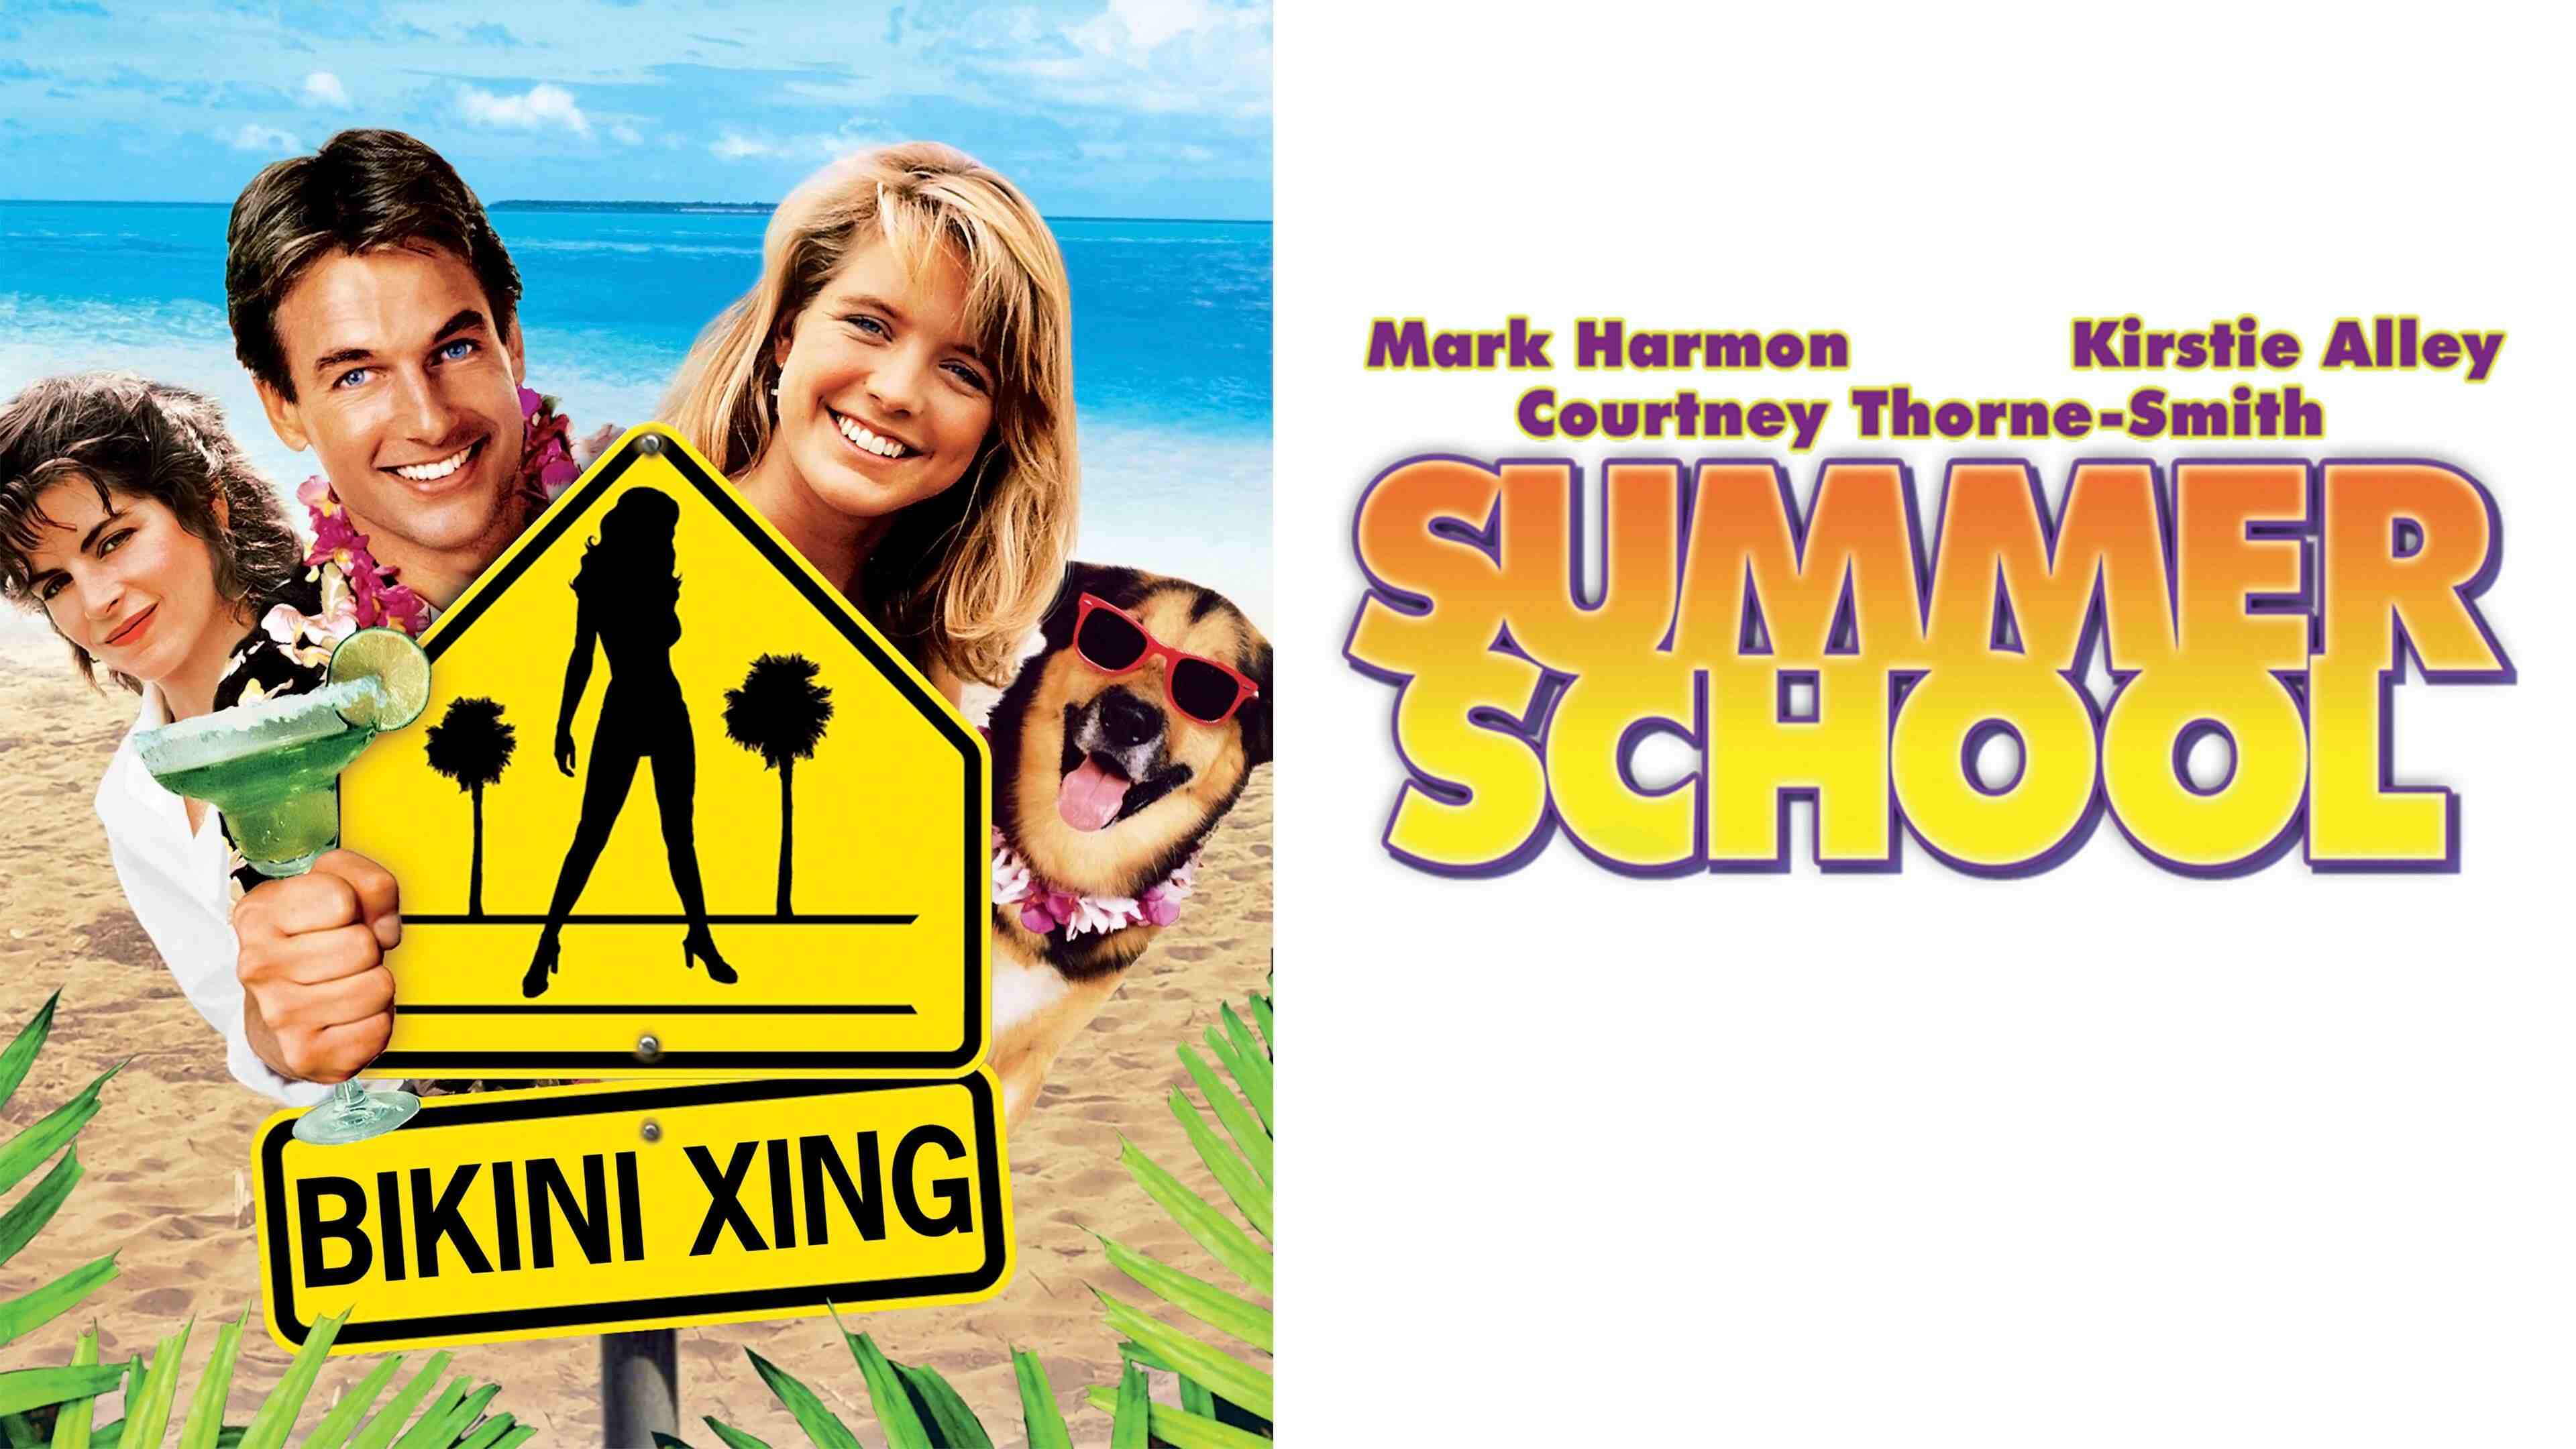 43-facts-about-the-movie-summer-school